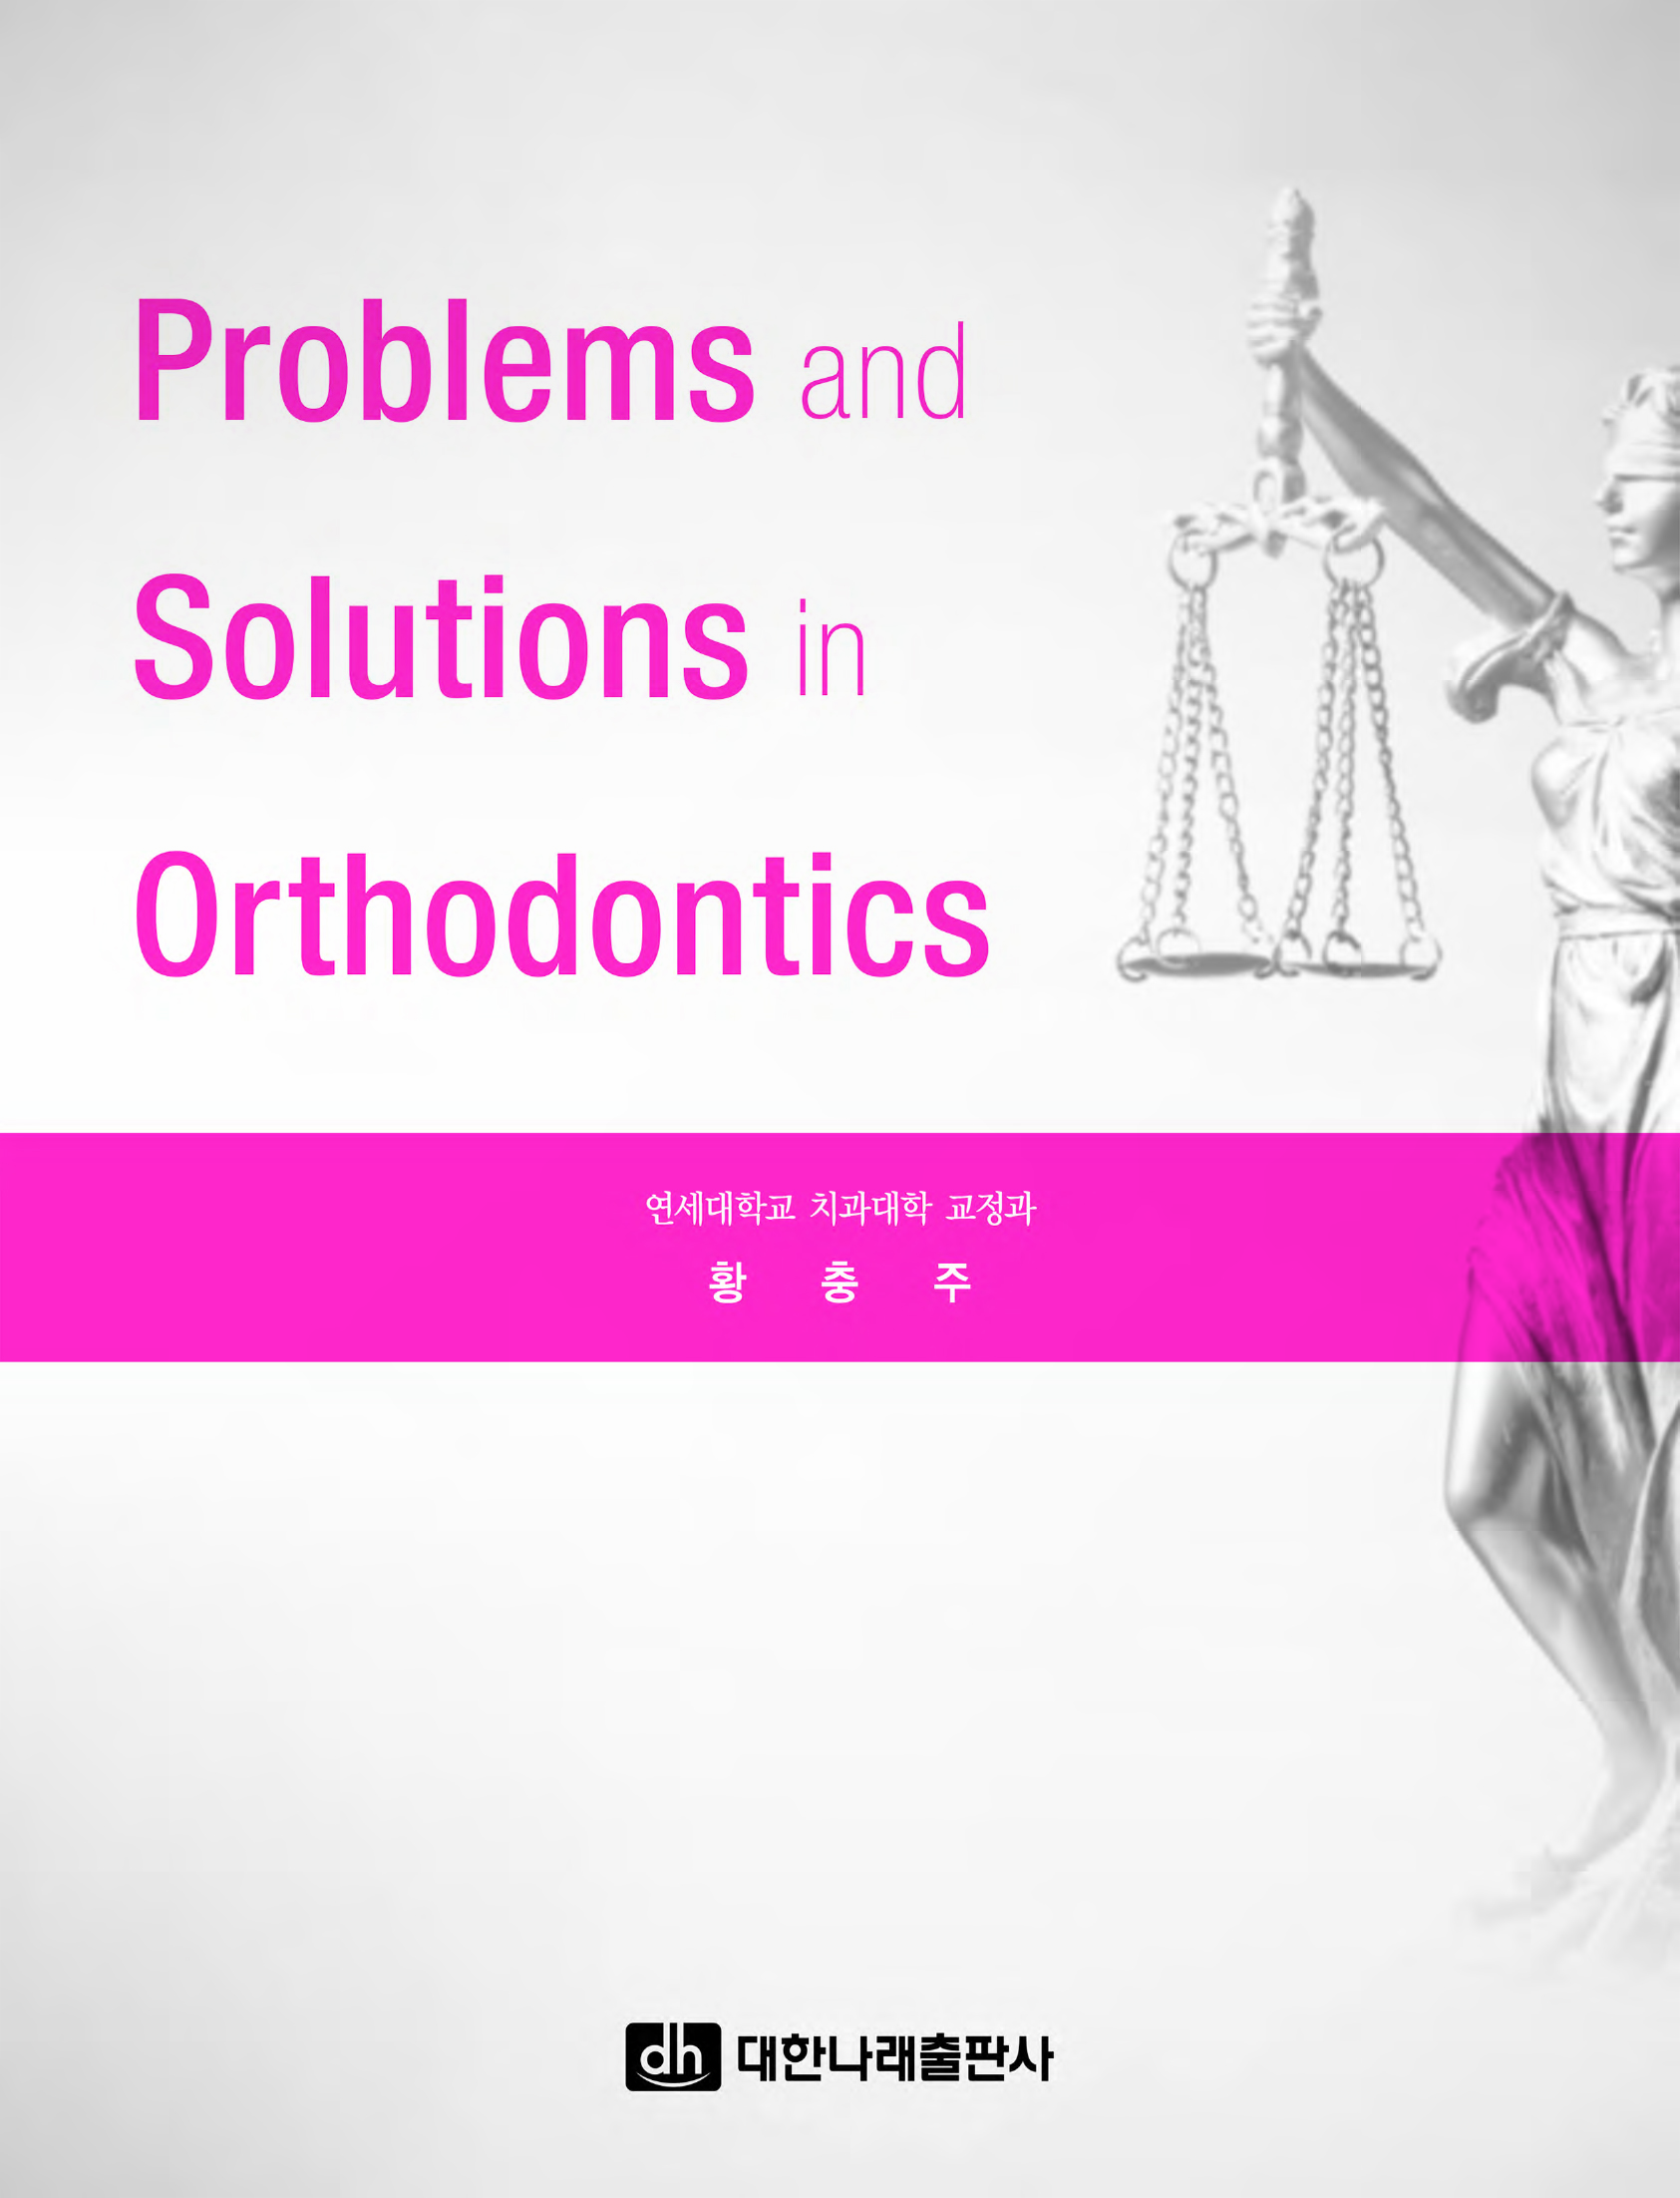 Problems and Solutions in Orthodontics